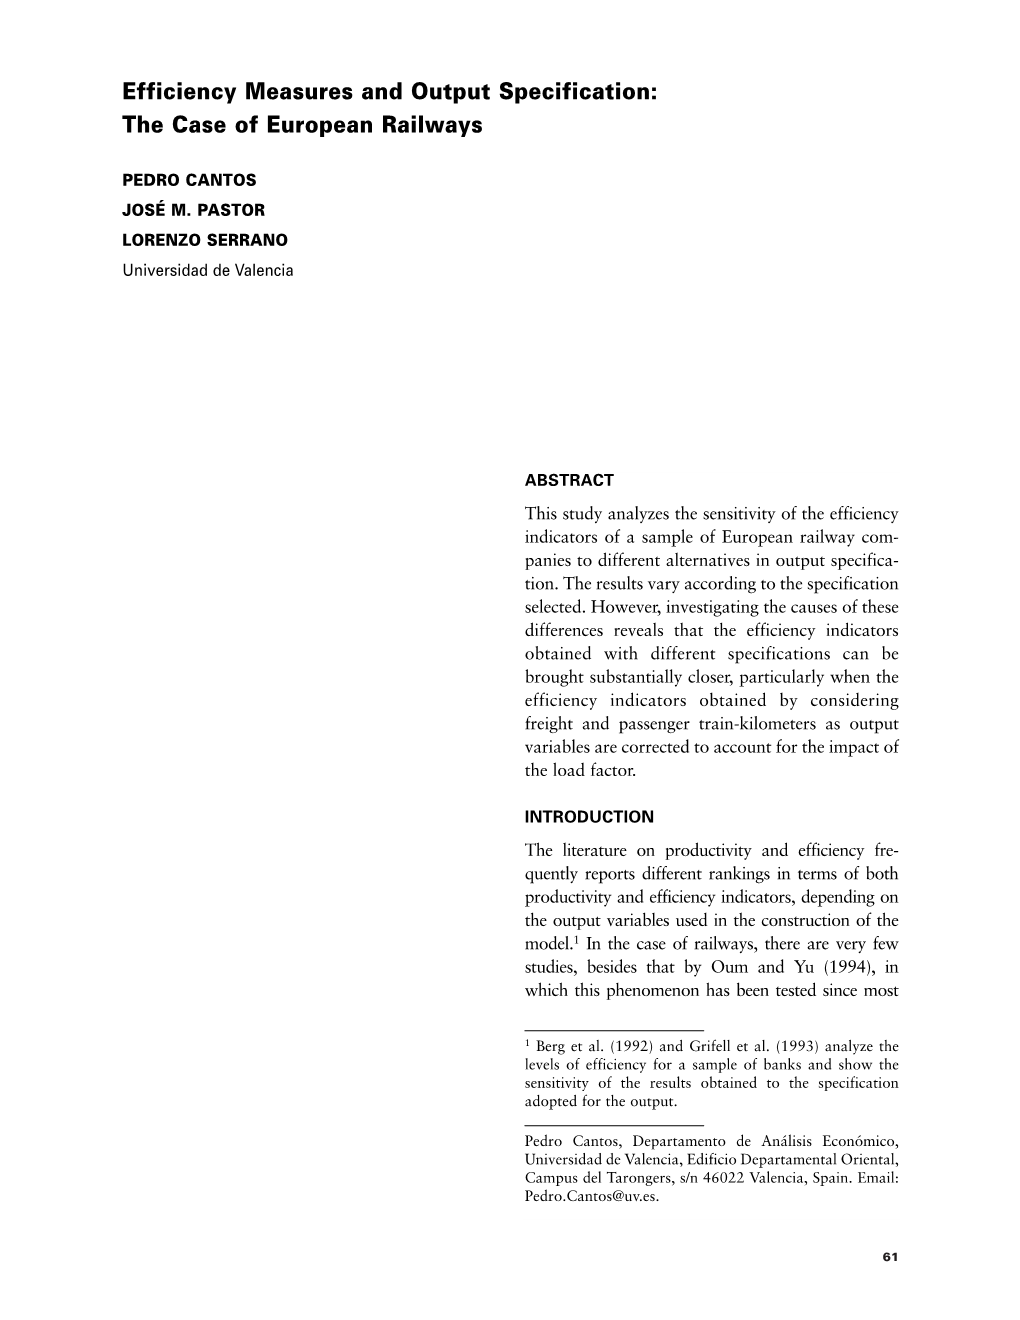 Efficiency Measures and Output Specification: the Case of European Railways